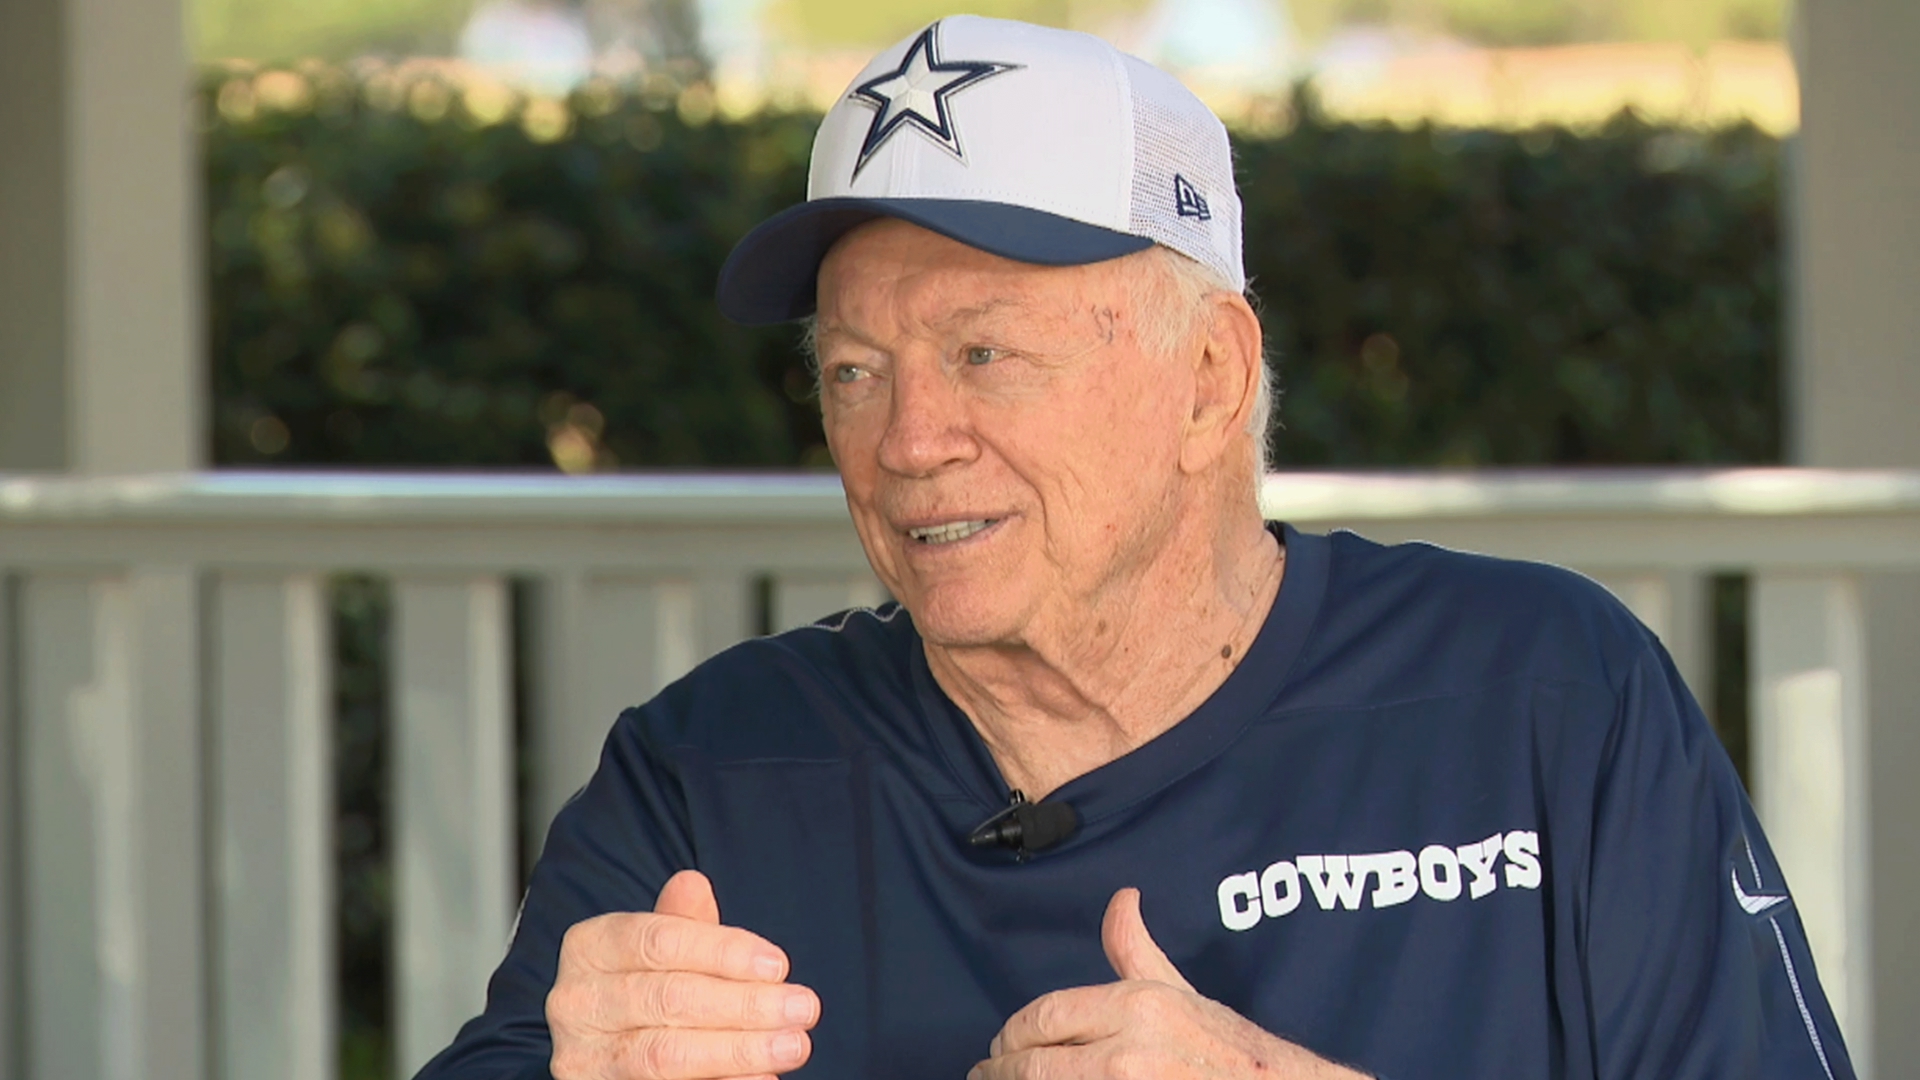 Dallas Cowboys owner Jerry Jones sat down with Joe Trahan for a one-on-one interview.